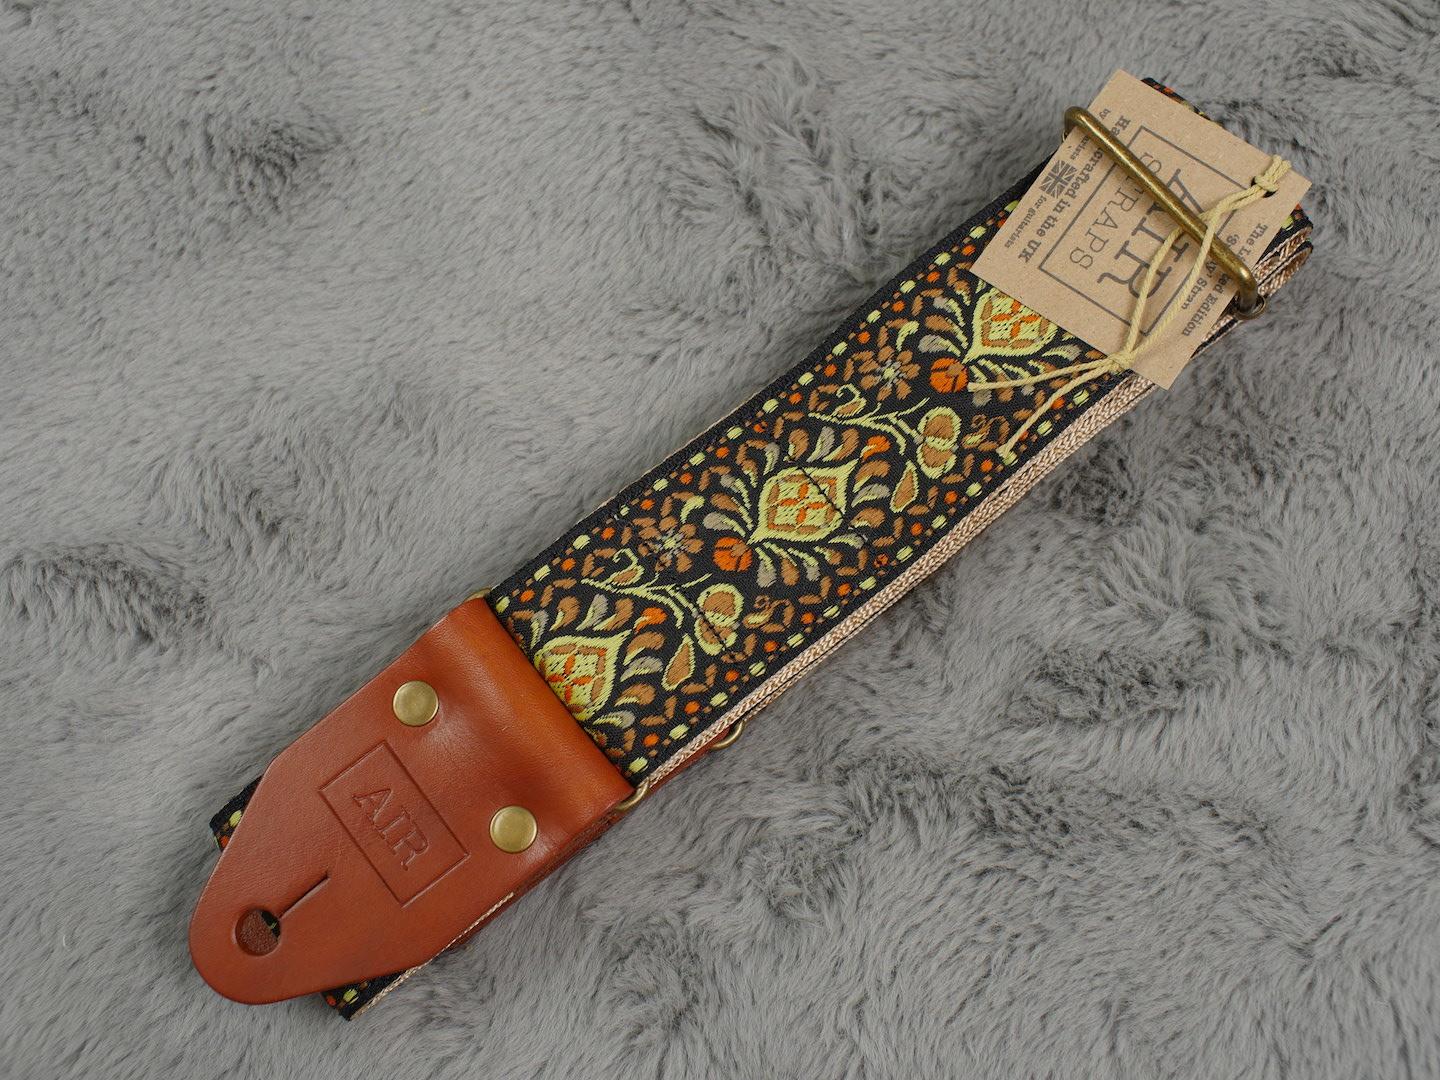 Air Straps Limited Edition 'Sunny' Guitar Strap